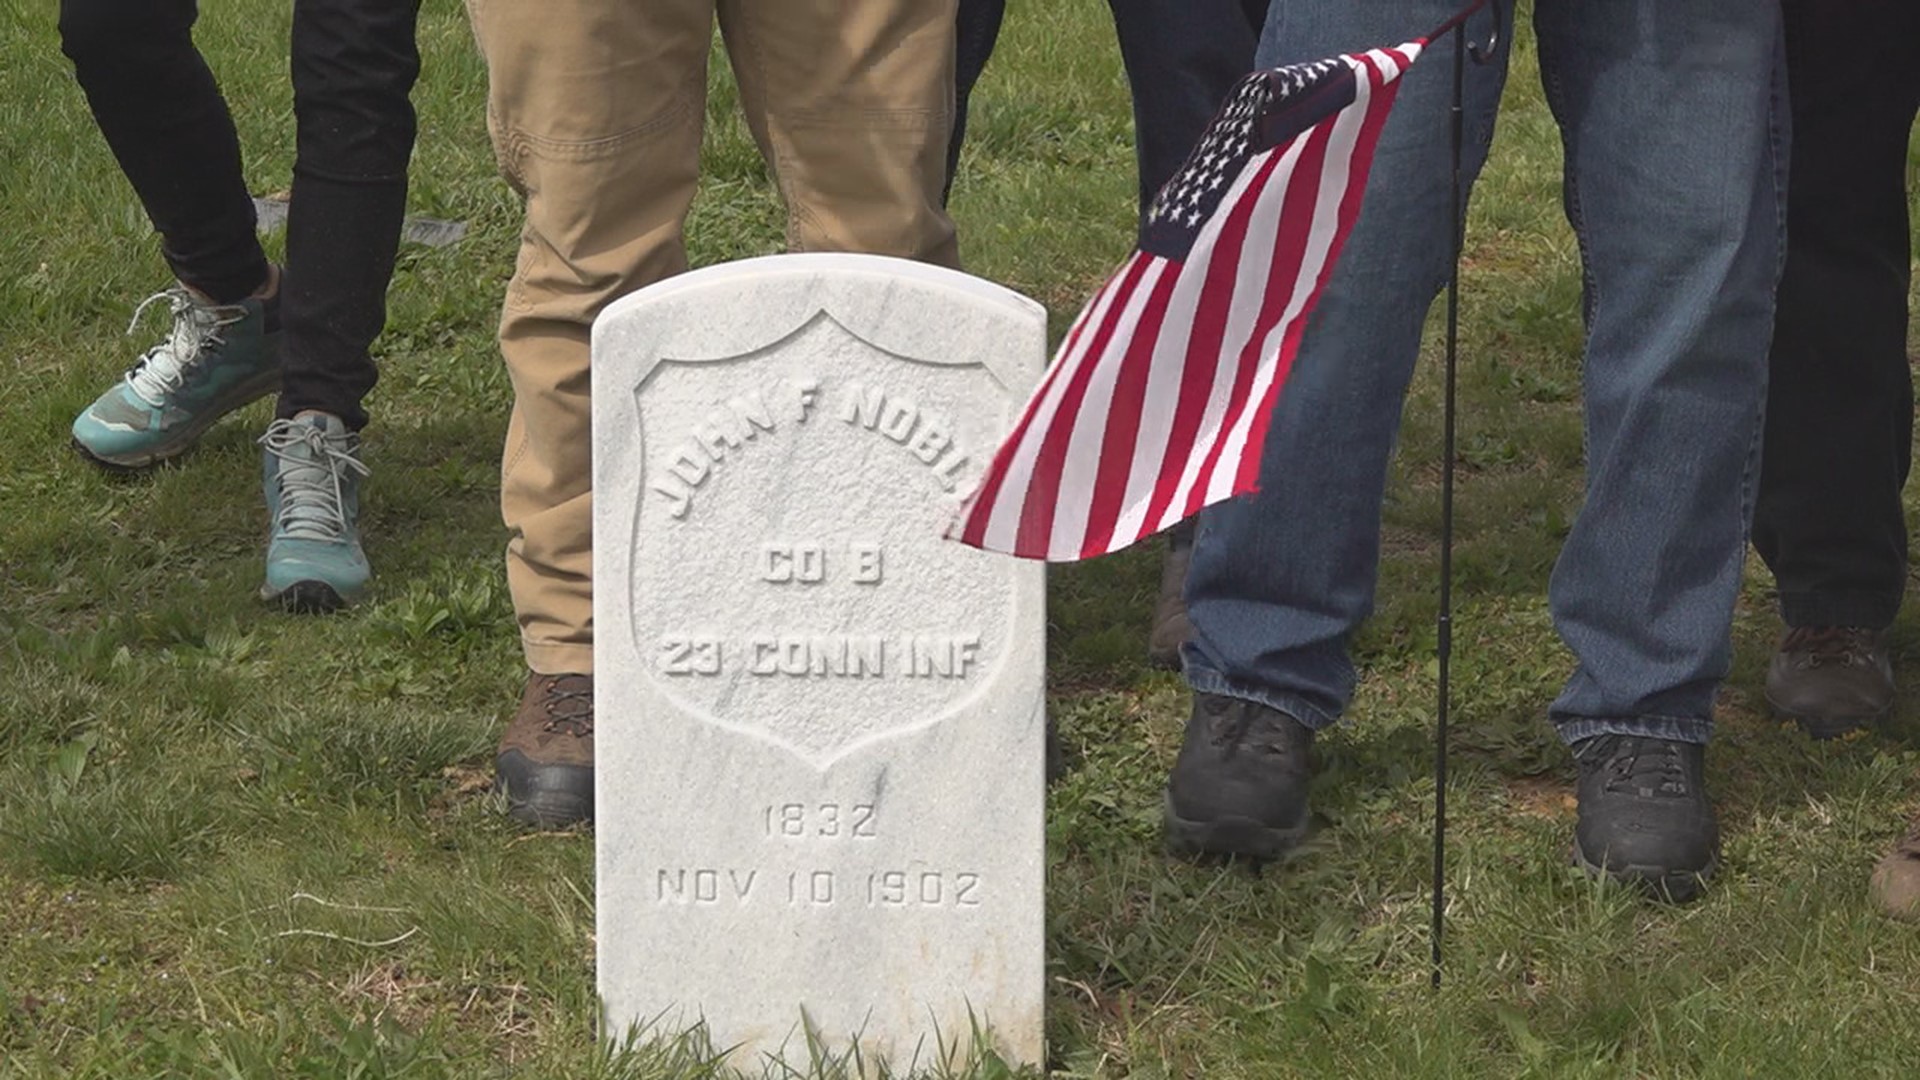 Five African American veterans were presented with new military headstones in a ceremony at the historic York cemetery.